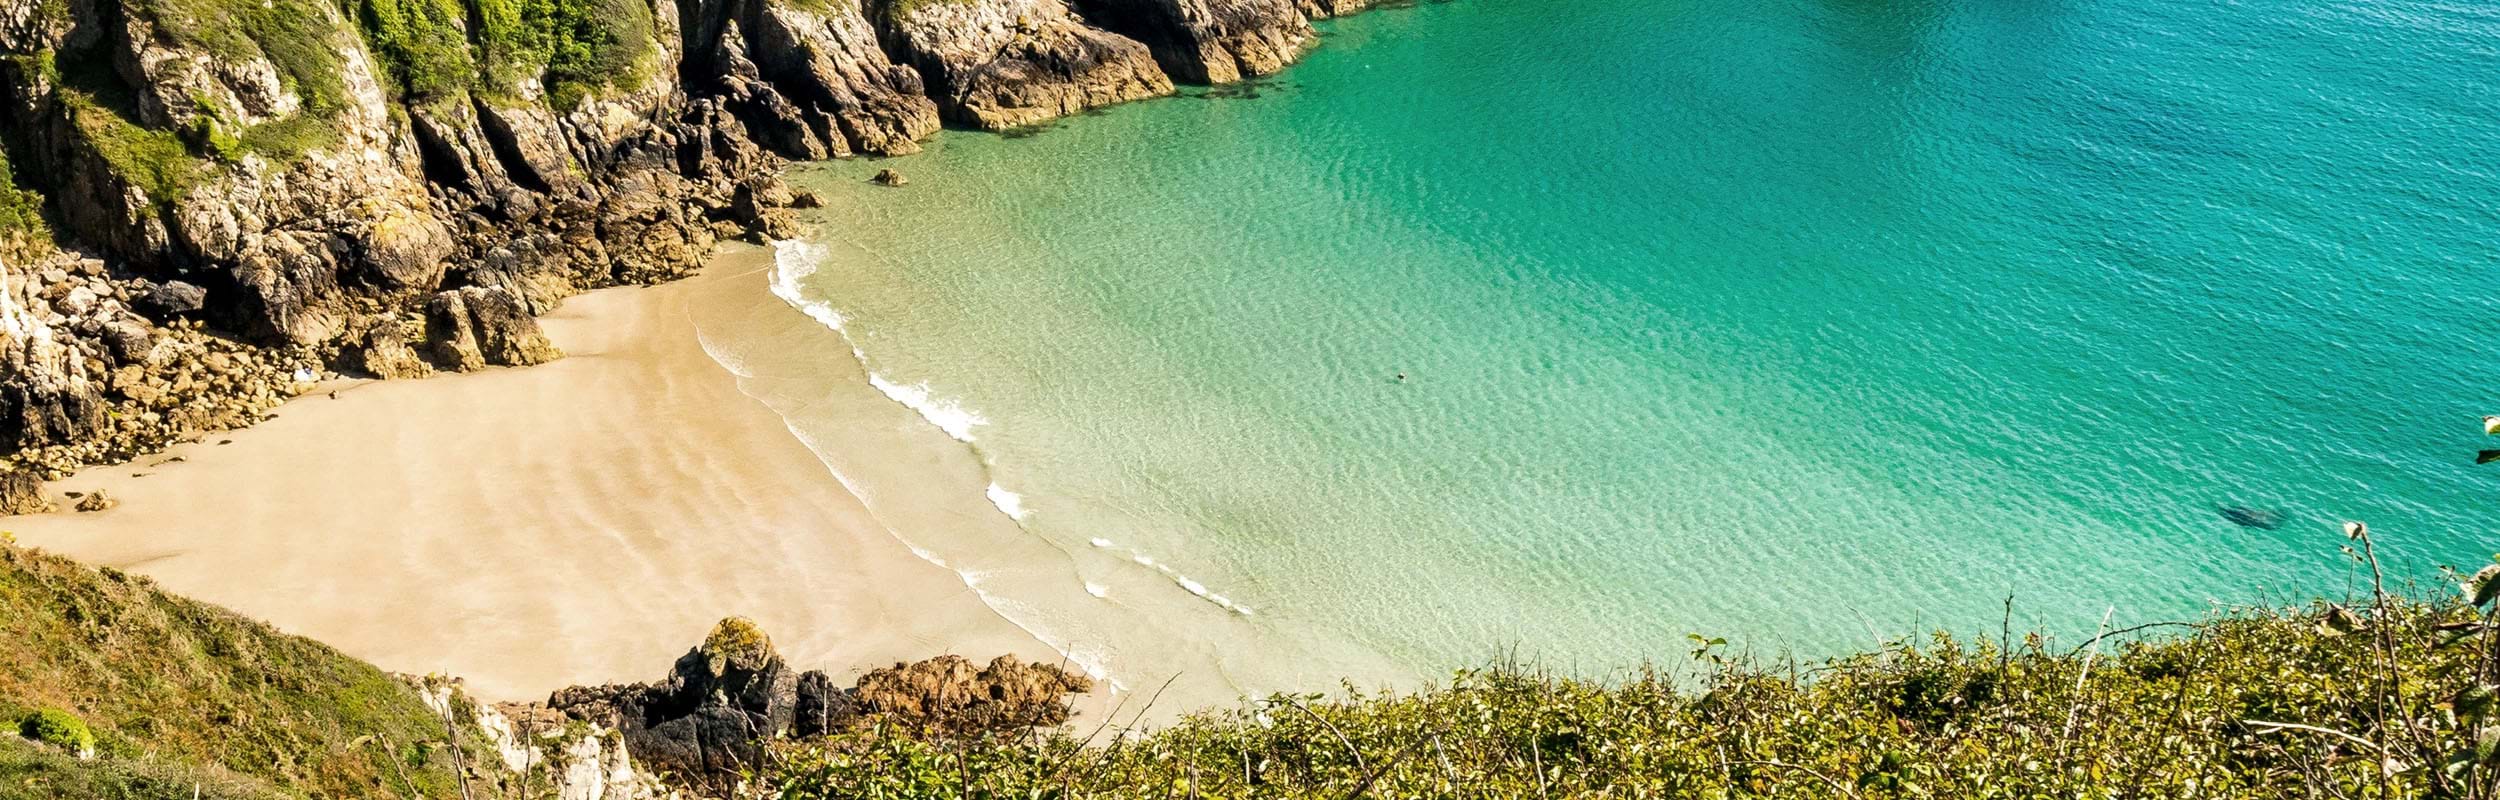 Sail away to Guernsey, from £90